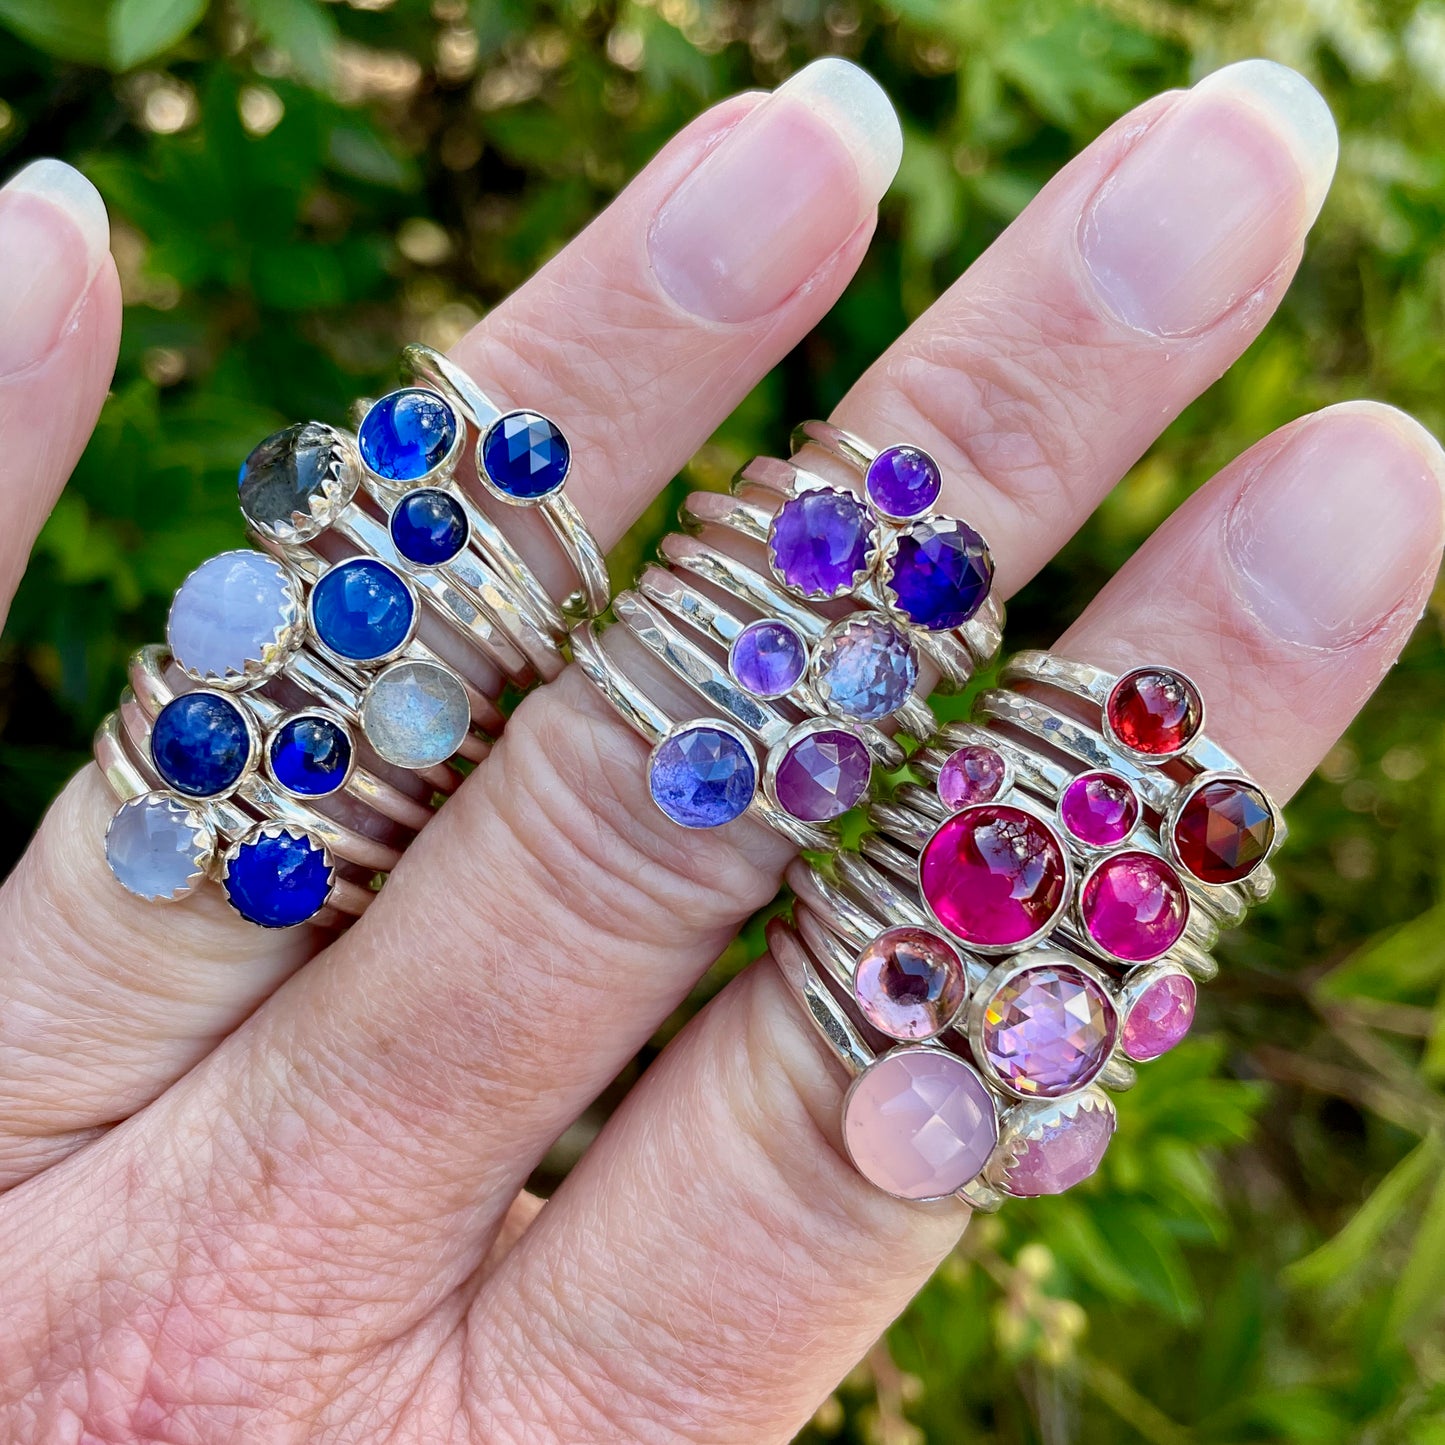 A hand modeling handmade gemstone stacking rings in blue, purple, pink and red colors.